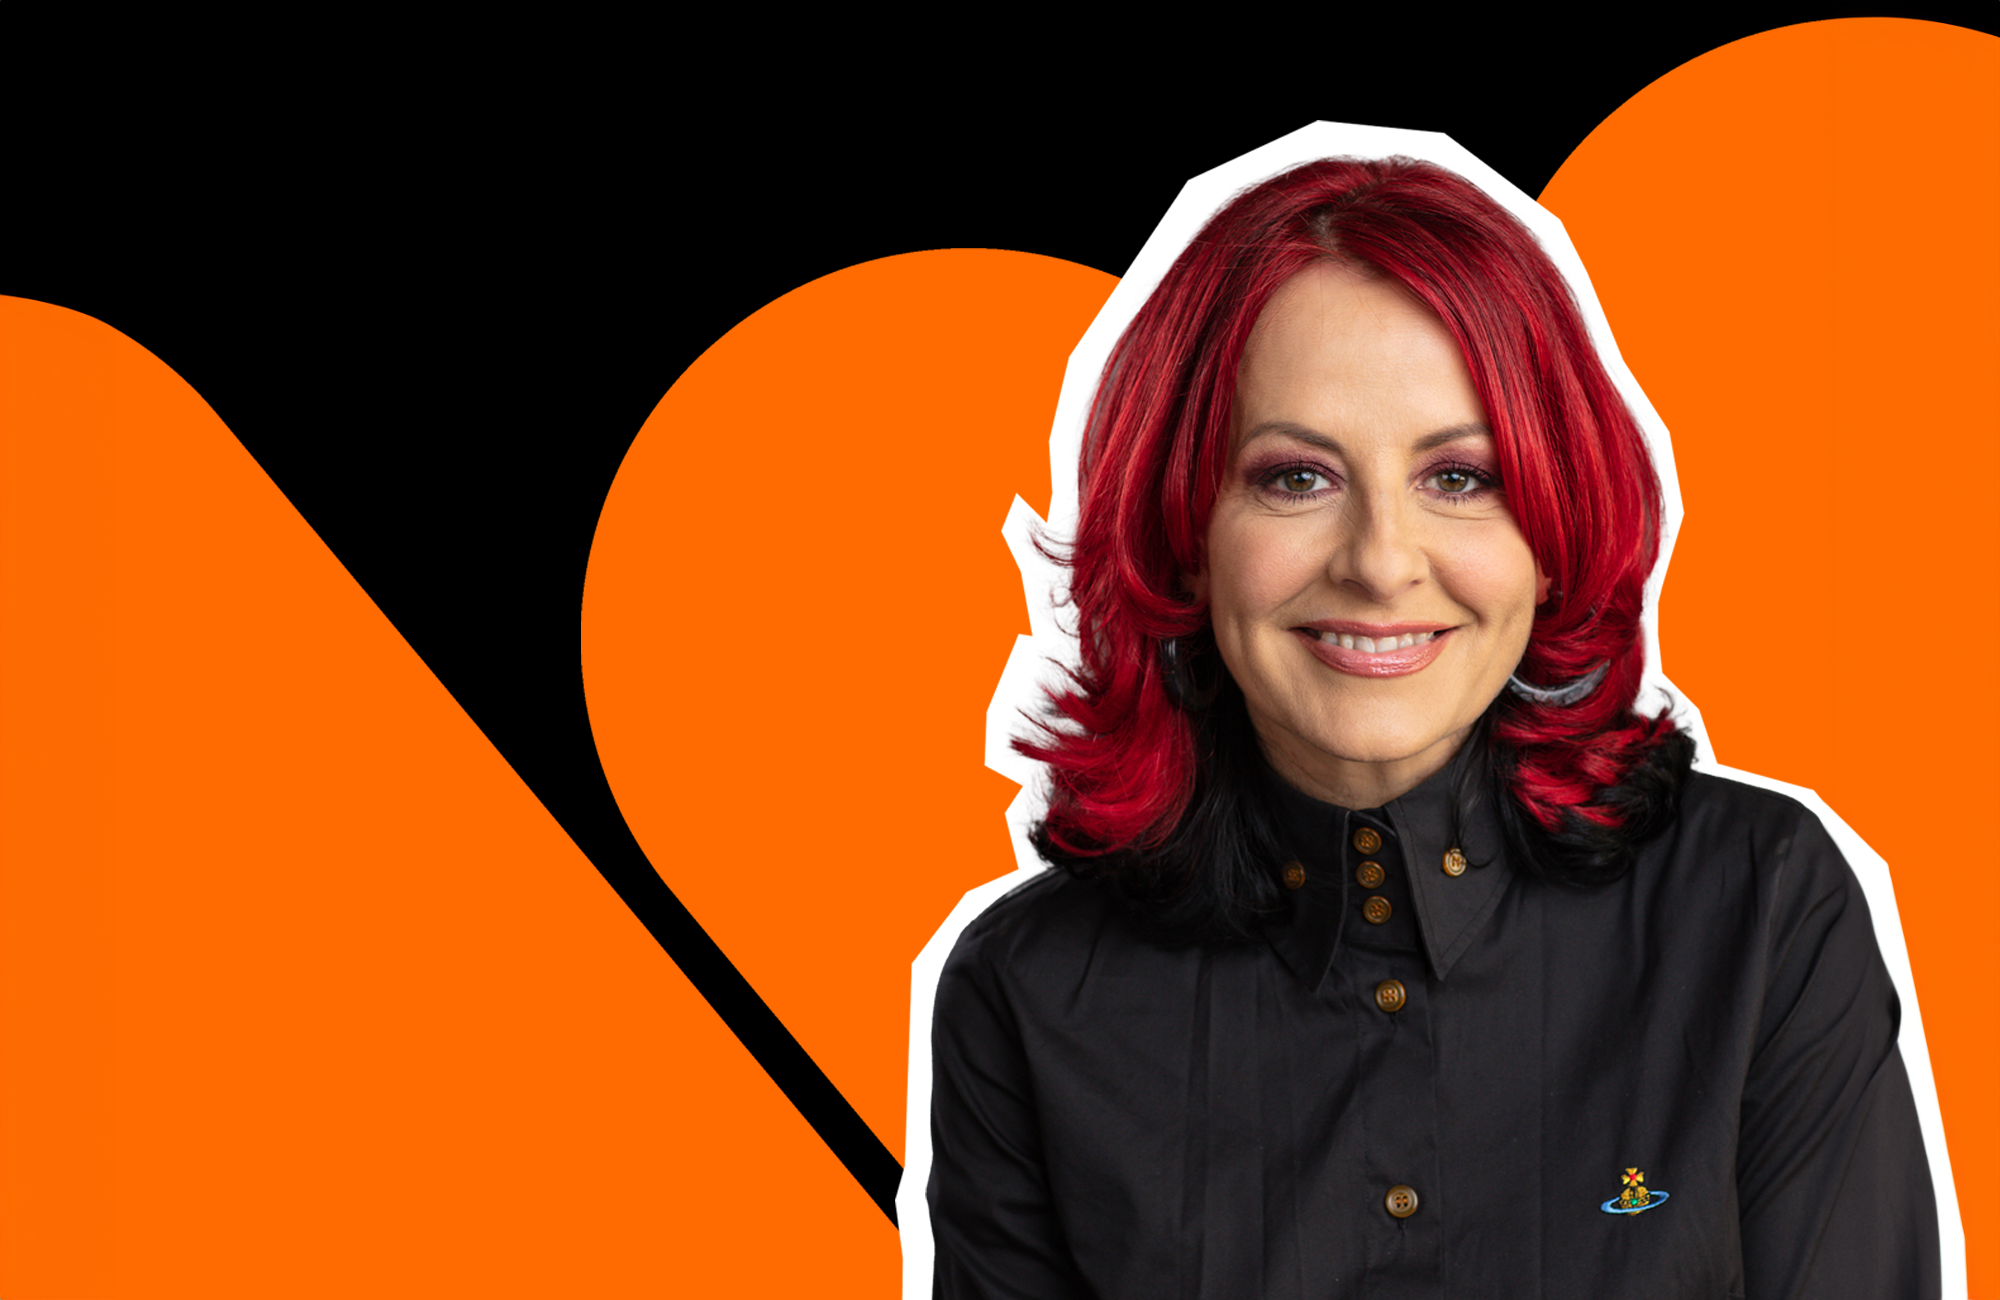 Carrie Grant smiles to camera in front of a orange and black background